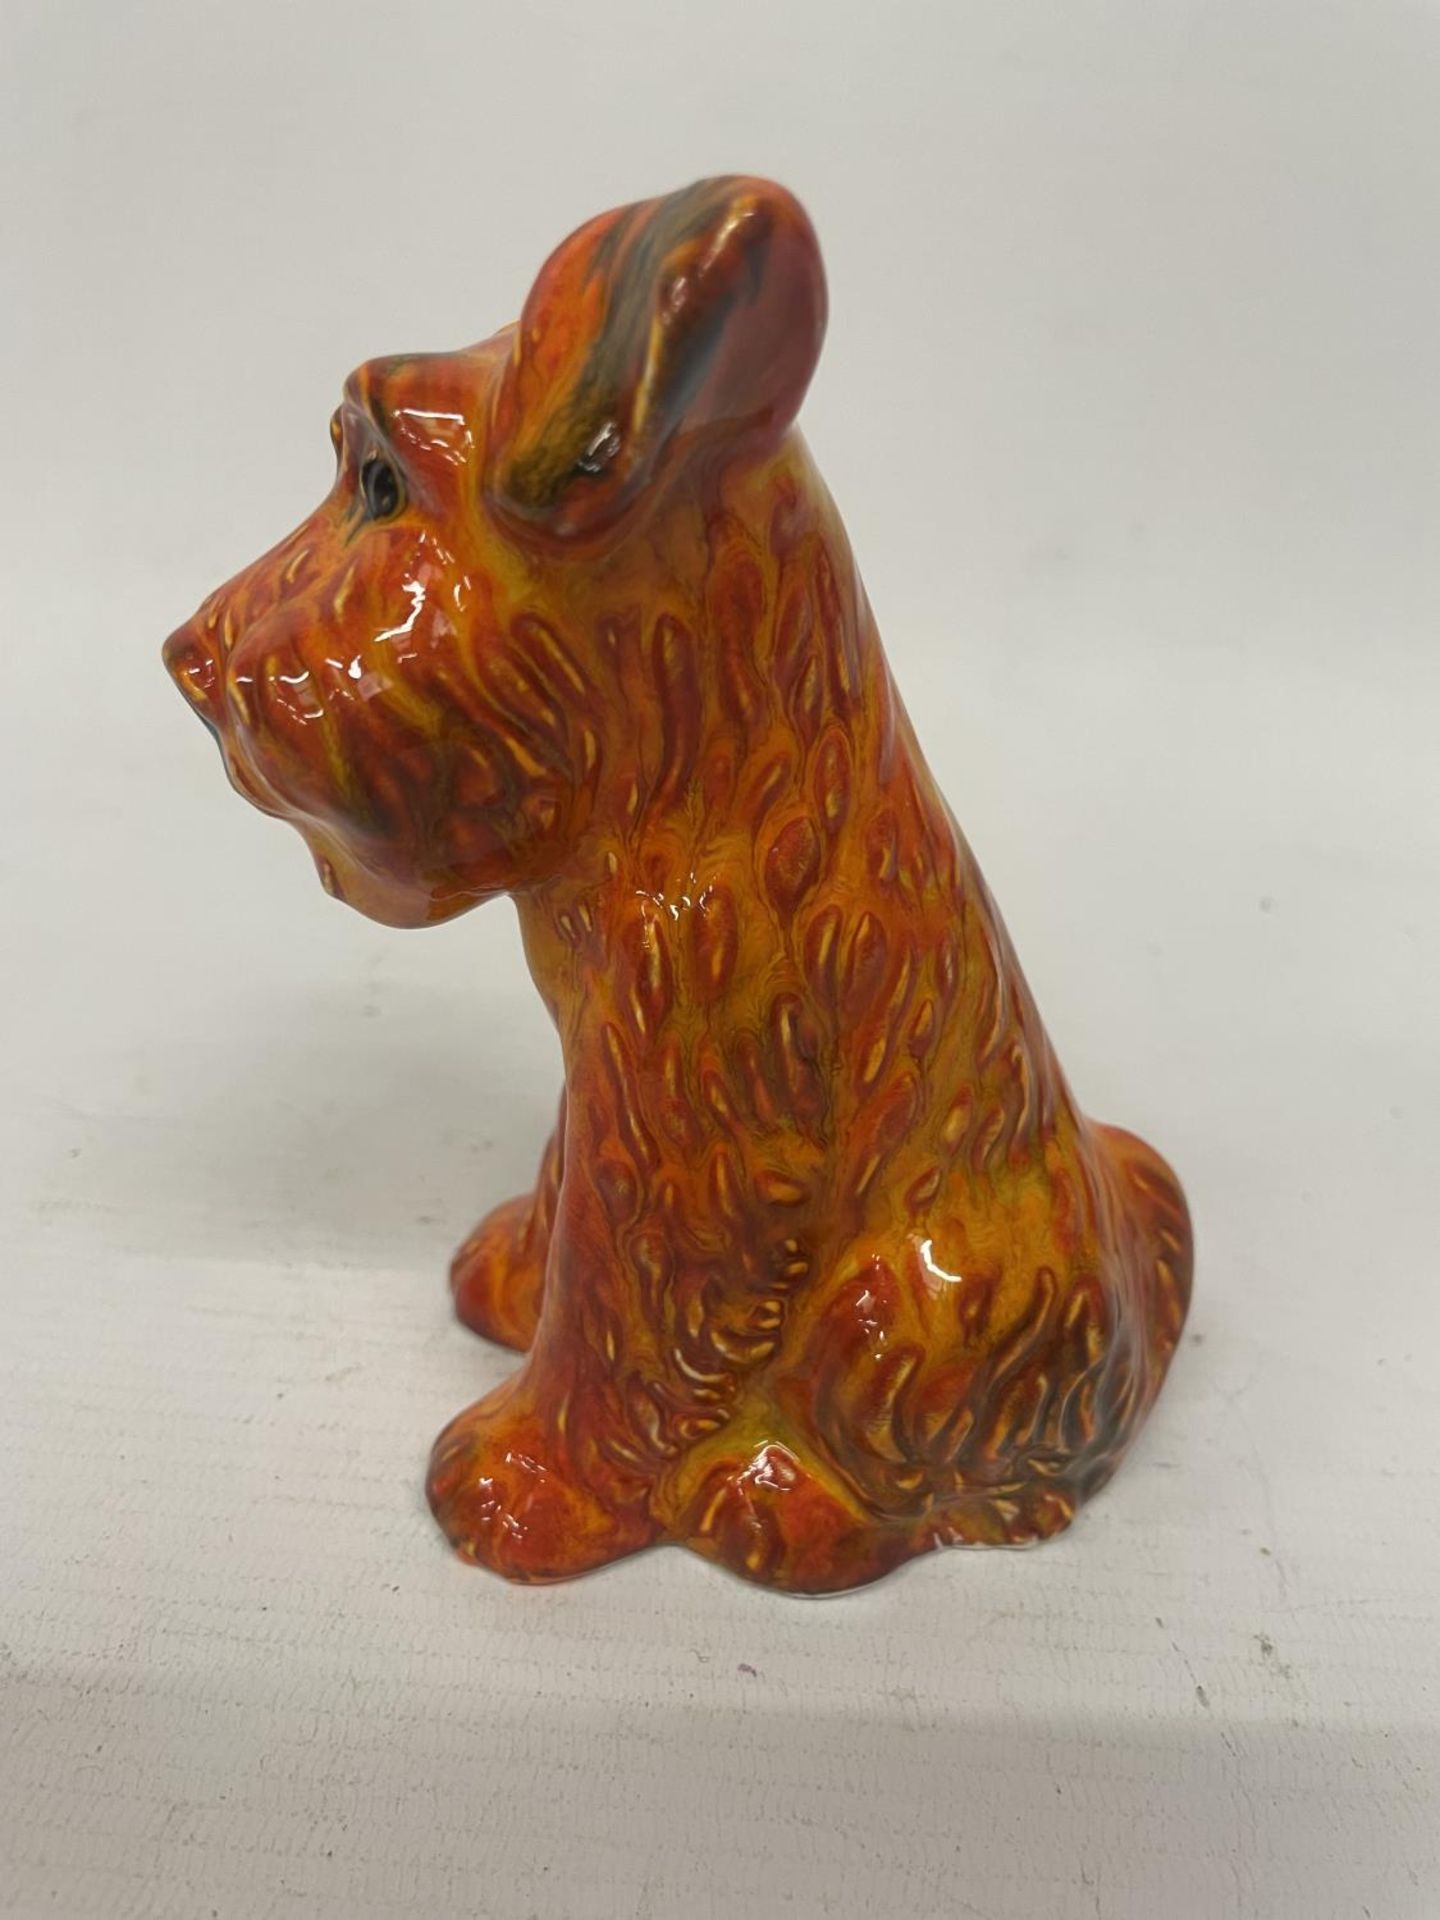 AN ANITA HARRIS TERRIER DOG FIGURE HAND PAINTED AND SIGNED IN GOLD - Image 2 of 3